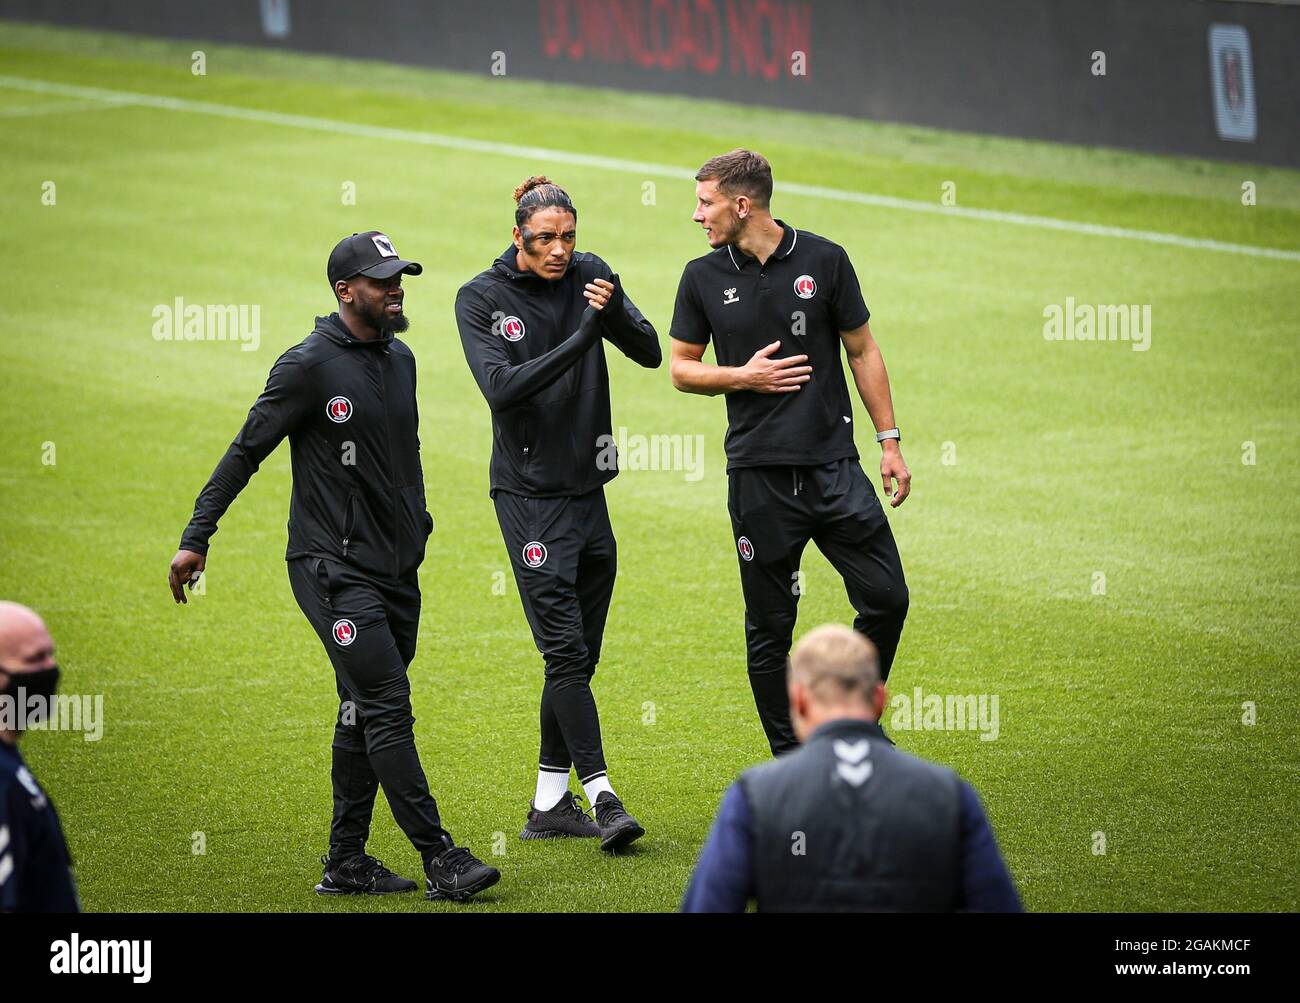 LONDON, UK. JULY 31ST Charlton Athletic players inspect the pitch prior to kick off during the Pre-season Friendly match between Fulham and Charlton Athletic at Craven Cottage, London on Saturday 31st July 2021. (Credit: Tom West | MI News) Credit: MI News & Sport /Alamy Live News Stock Photo